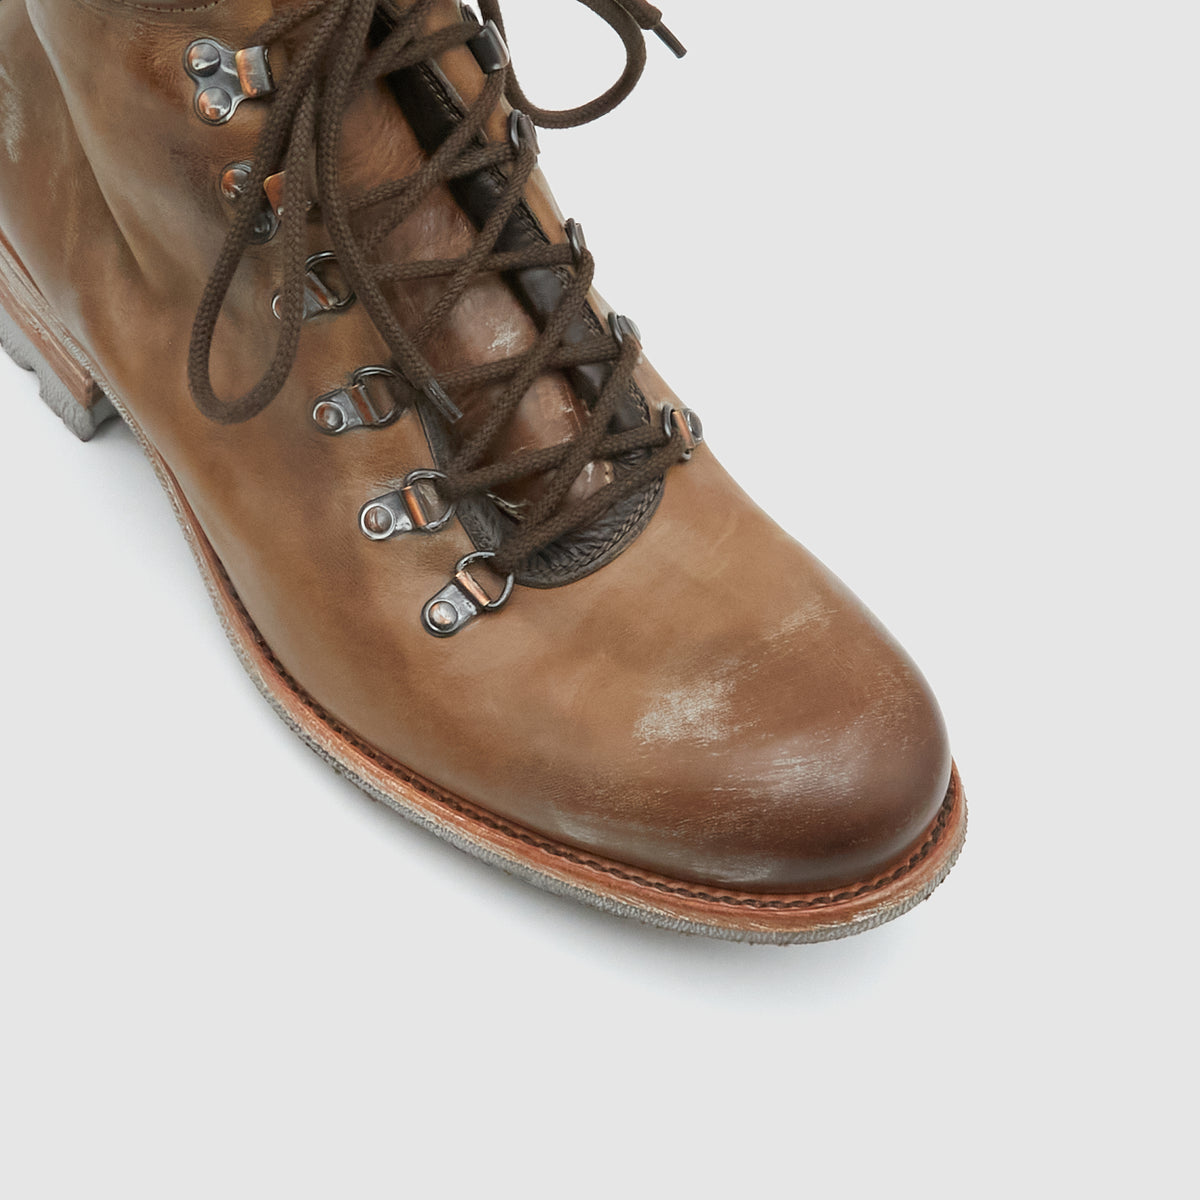 n.d.c. made by hand Montblanc Barrage Wash Boots